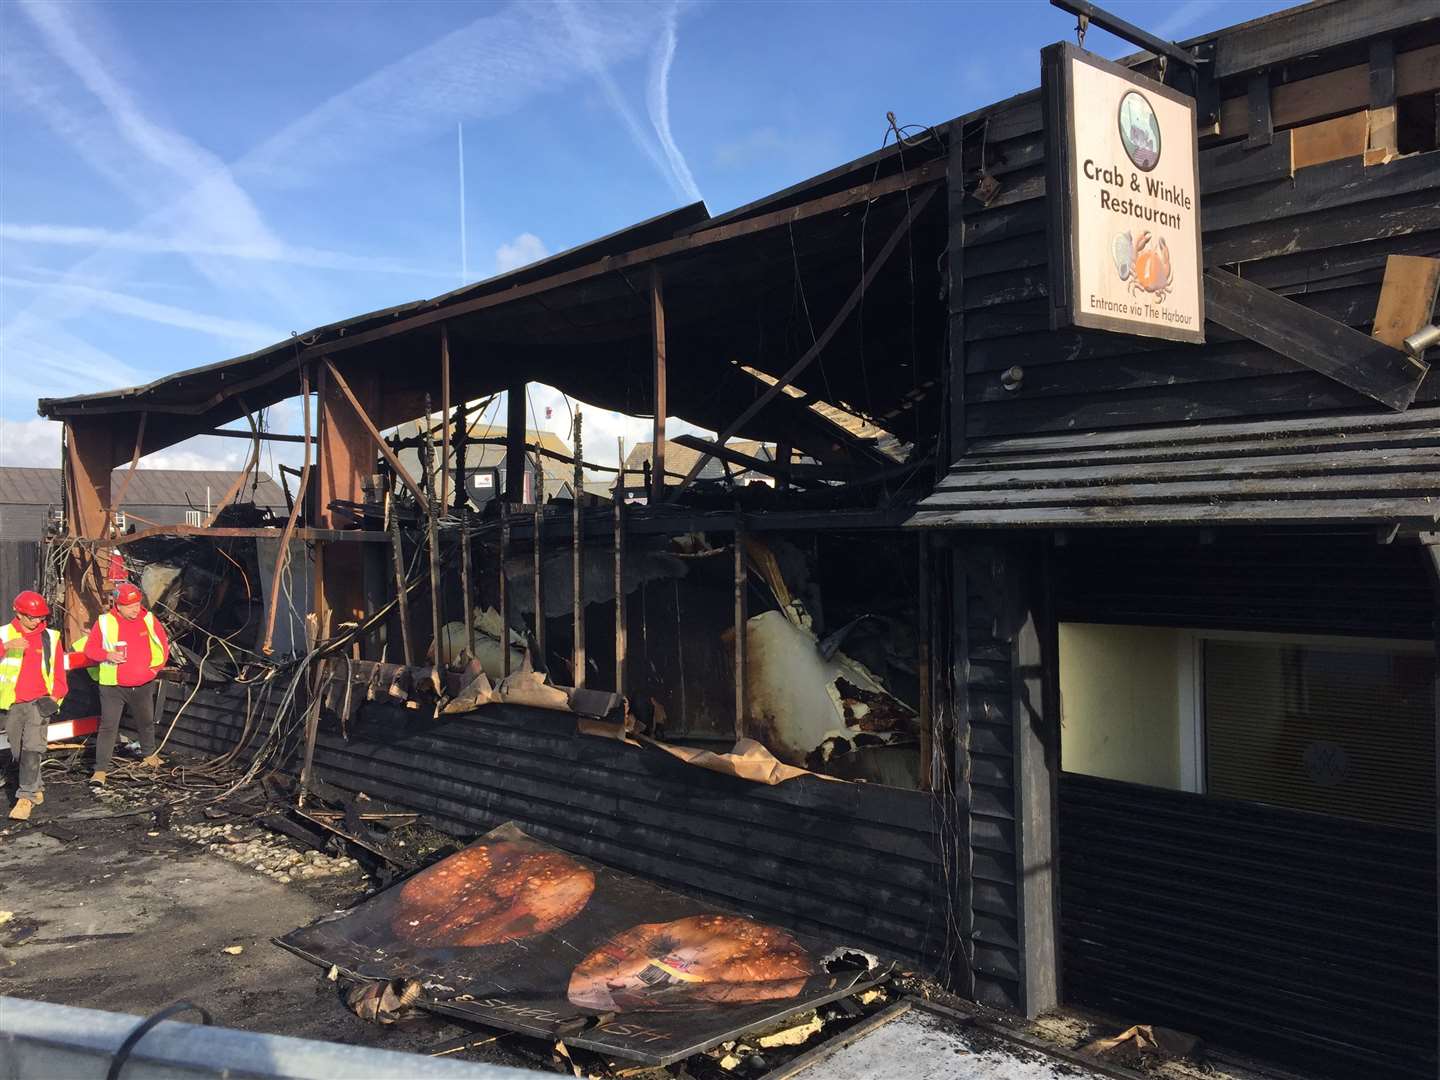 The aftermath of the fire at Whitstable Harbour in May 2022 which destroyed the Crab and Winkle restaurant